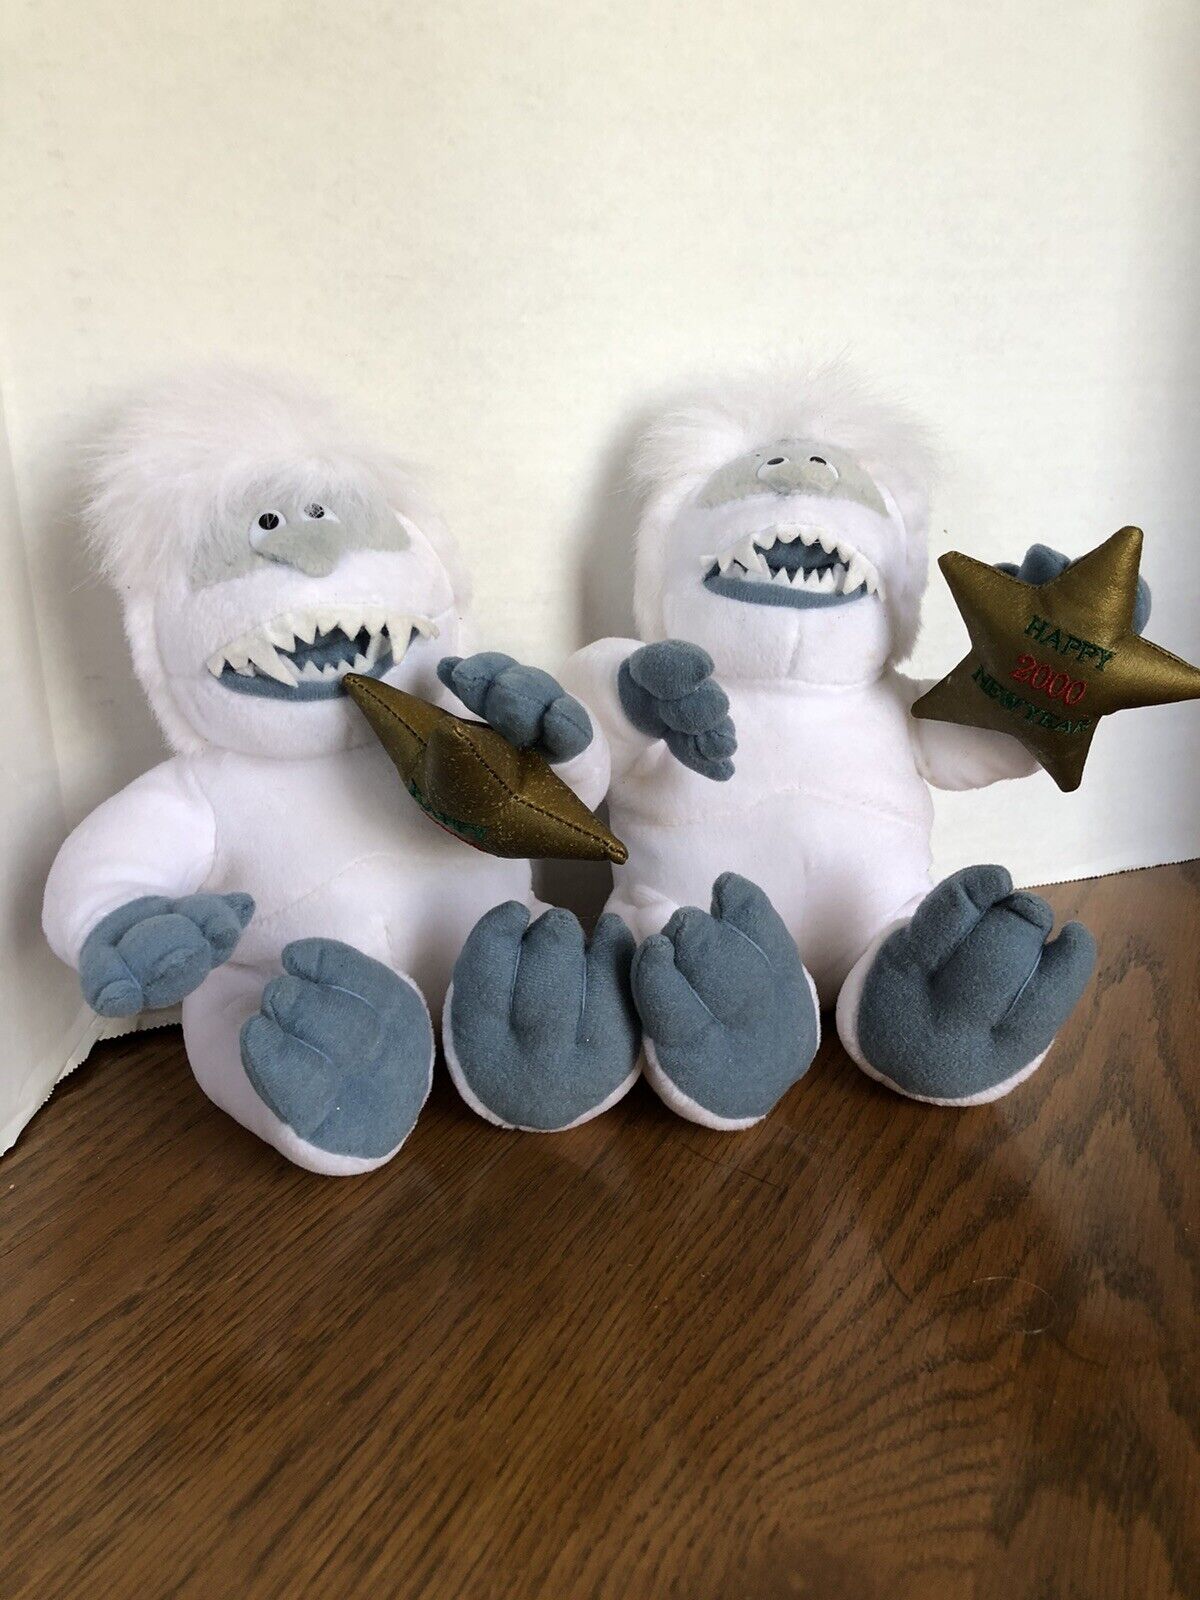 2 CVS Stuffins Abominable Snowman Rudolph Island of Misfit Toys One NWT NWOT